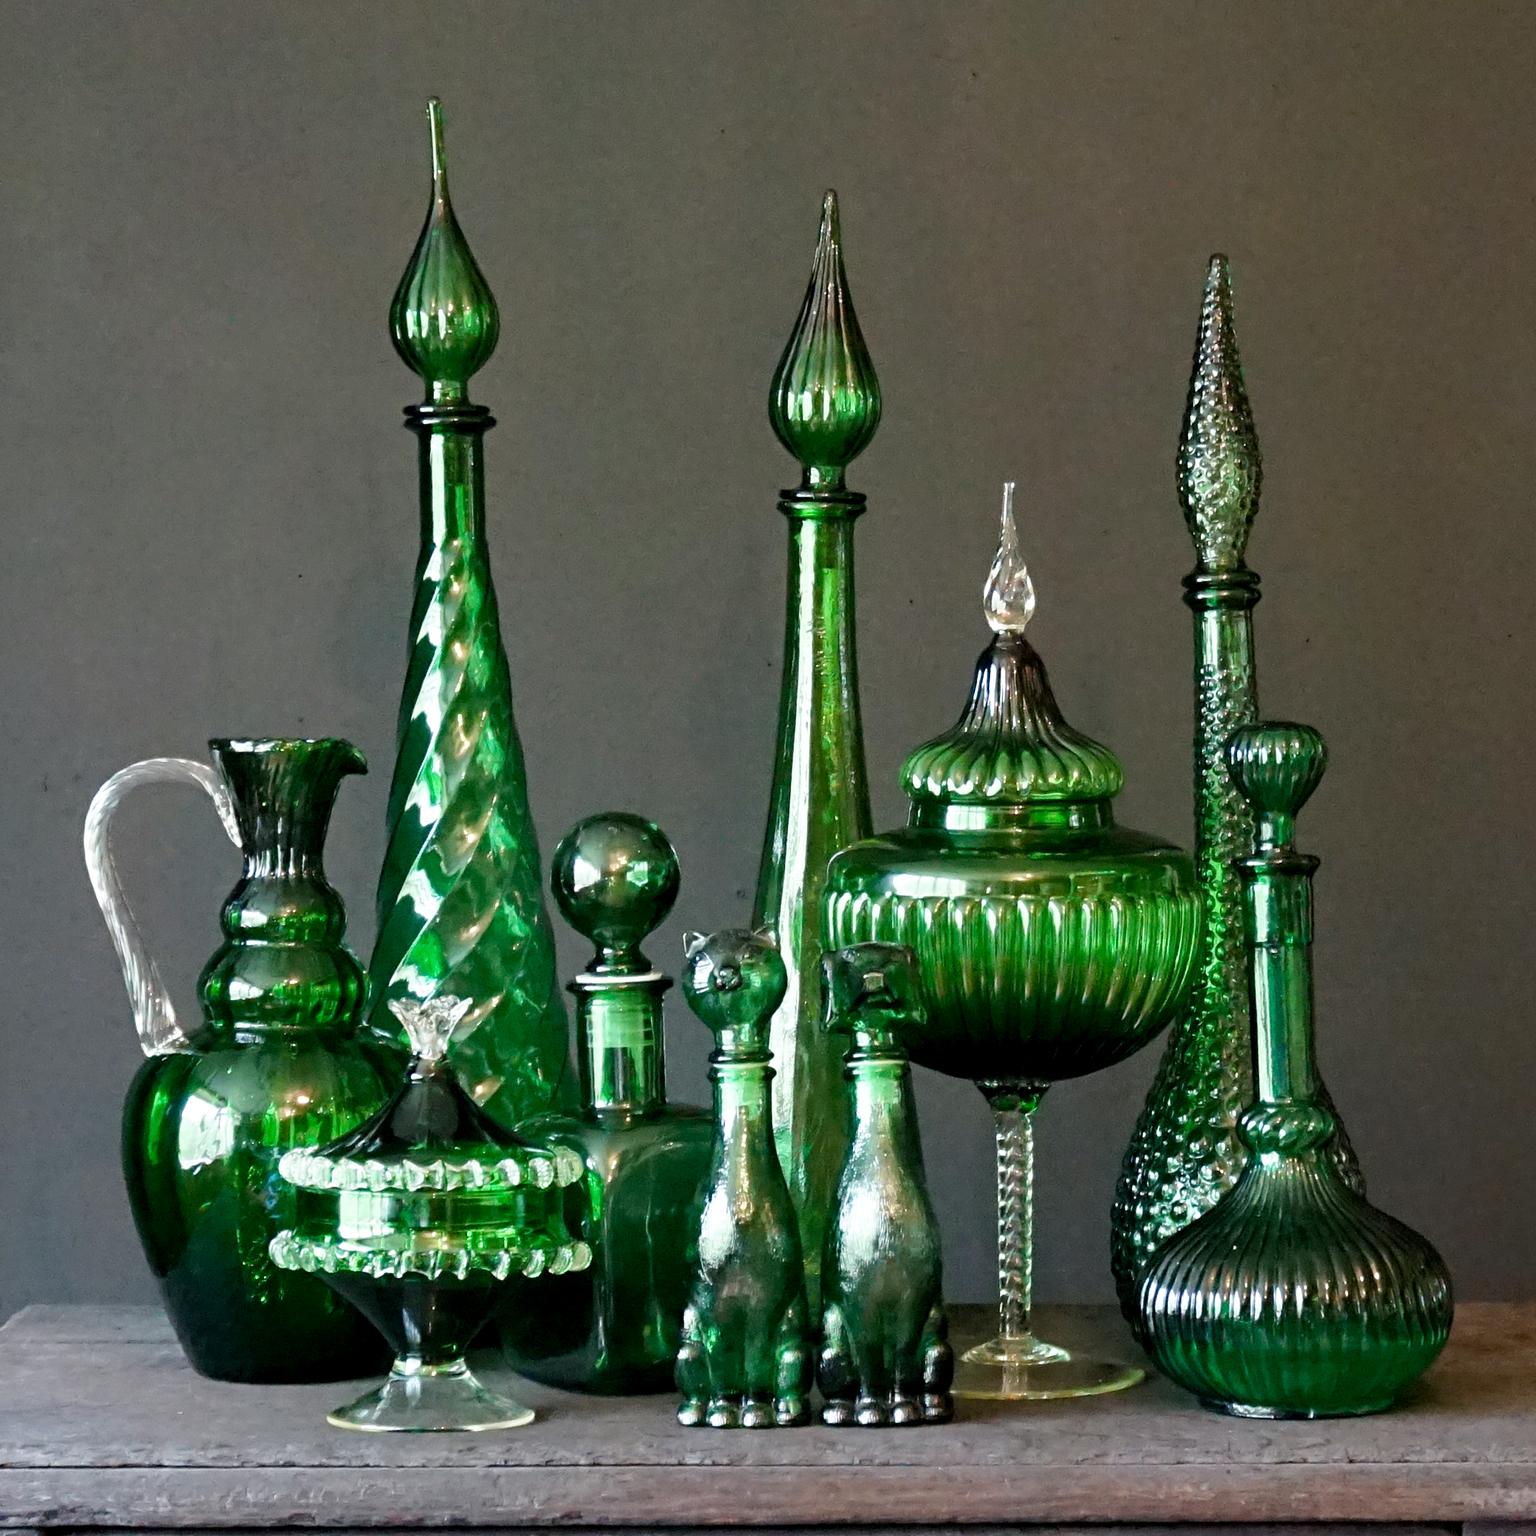 Spectacular set of ten 1960s green Italian Empoli pressed and blown glass. Three genie bottles, a mini dog shaped bottle and a cute cat shaped one. A large handblown two color pitcher, a 'corset' decanter. A Brutalist 'block' shaped decanter with a